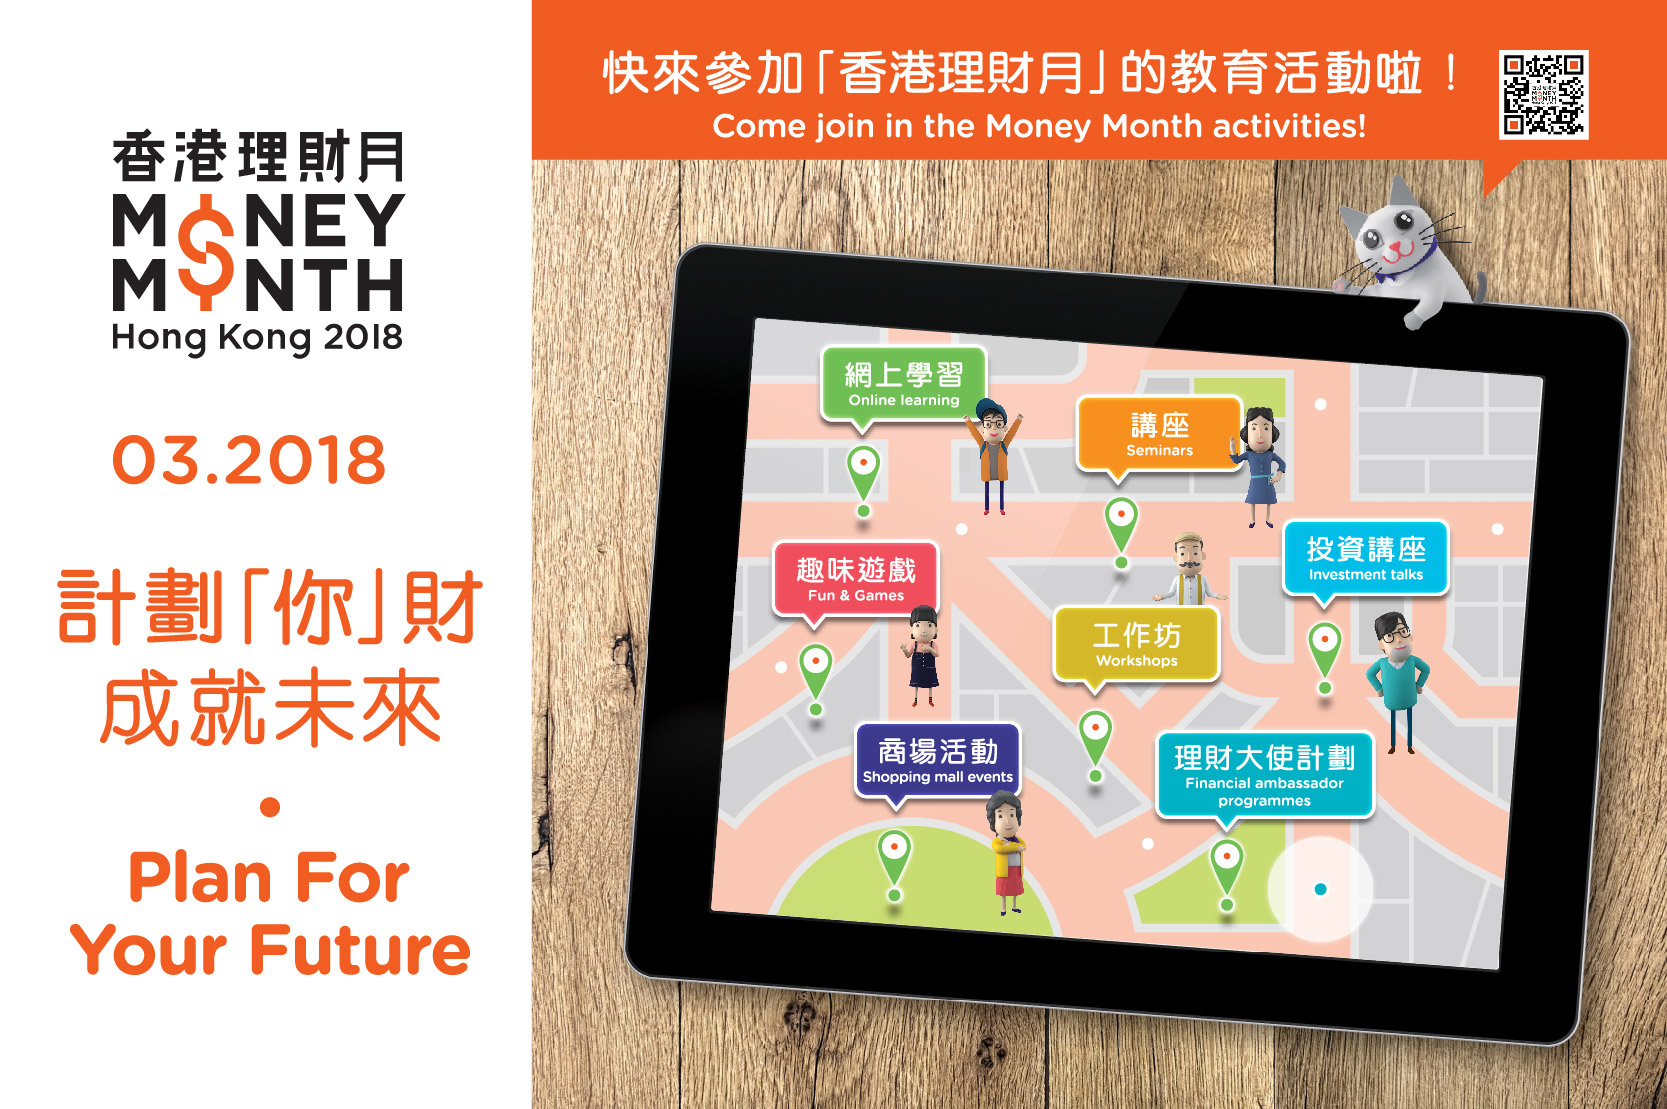 Come join Hong Kong Money Month 2018!